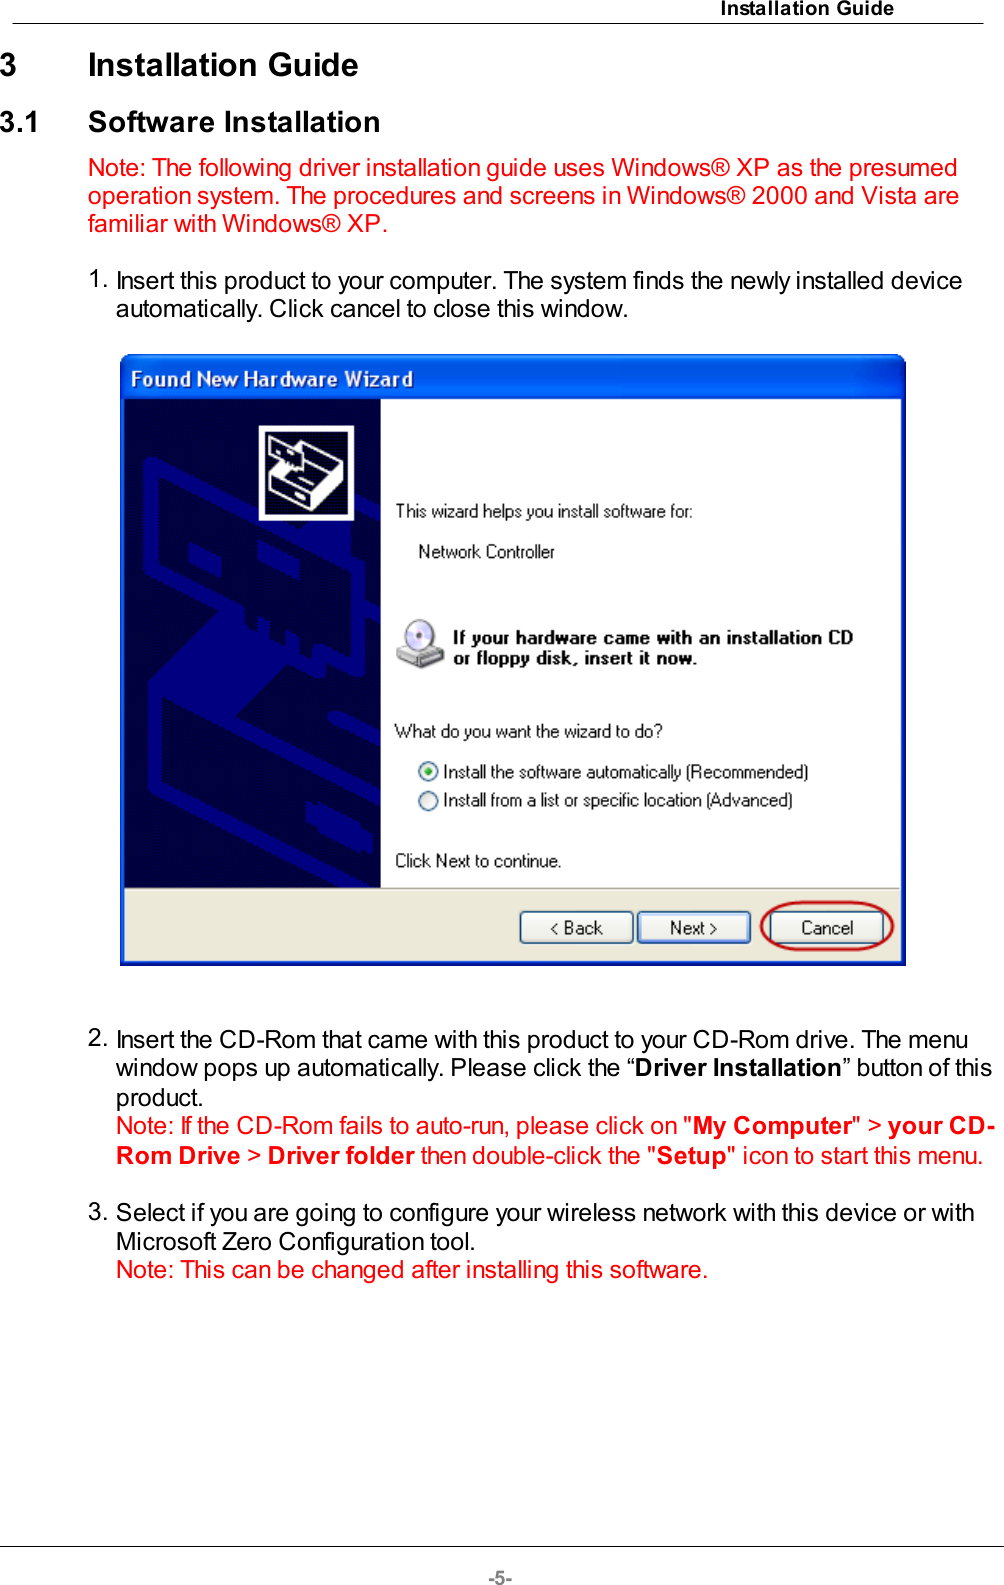 Installation Guide-5-3 Installation Guide3.1 Software InstallationNote: The following driver installation guide uses Windows® XP as the presumedoperation system. The procedures and screens in Windows® 2000 and Vista arefamiliar with Windows® XP.1. Insert this product to your computer. The system finds the newly installed deviceautomatically. Click cancel to close this window.2. Insert the CD-Rom that came with this product to your CD-Rom drive. The menuwindow pops up automatically. Please click the “Driver Installation” button of thisproduct.Note: If the CD-Rom fails to auto-run, please click on &quot;My Computer&quot; &gt; your CD-Rom Drive &gt; Driver folder then double-click the &quot;Setup&quot; icon to start this menu.3. Select if you are going to configure your wireless network with this device or withMicrosoft Zero Configuration tool.Note: This can be changed after installing this software.